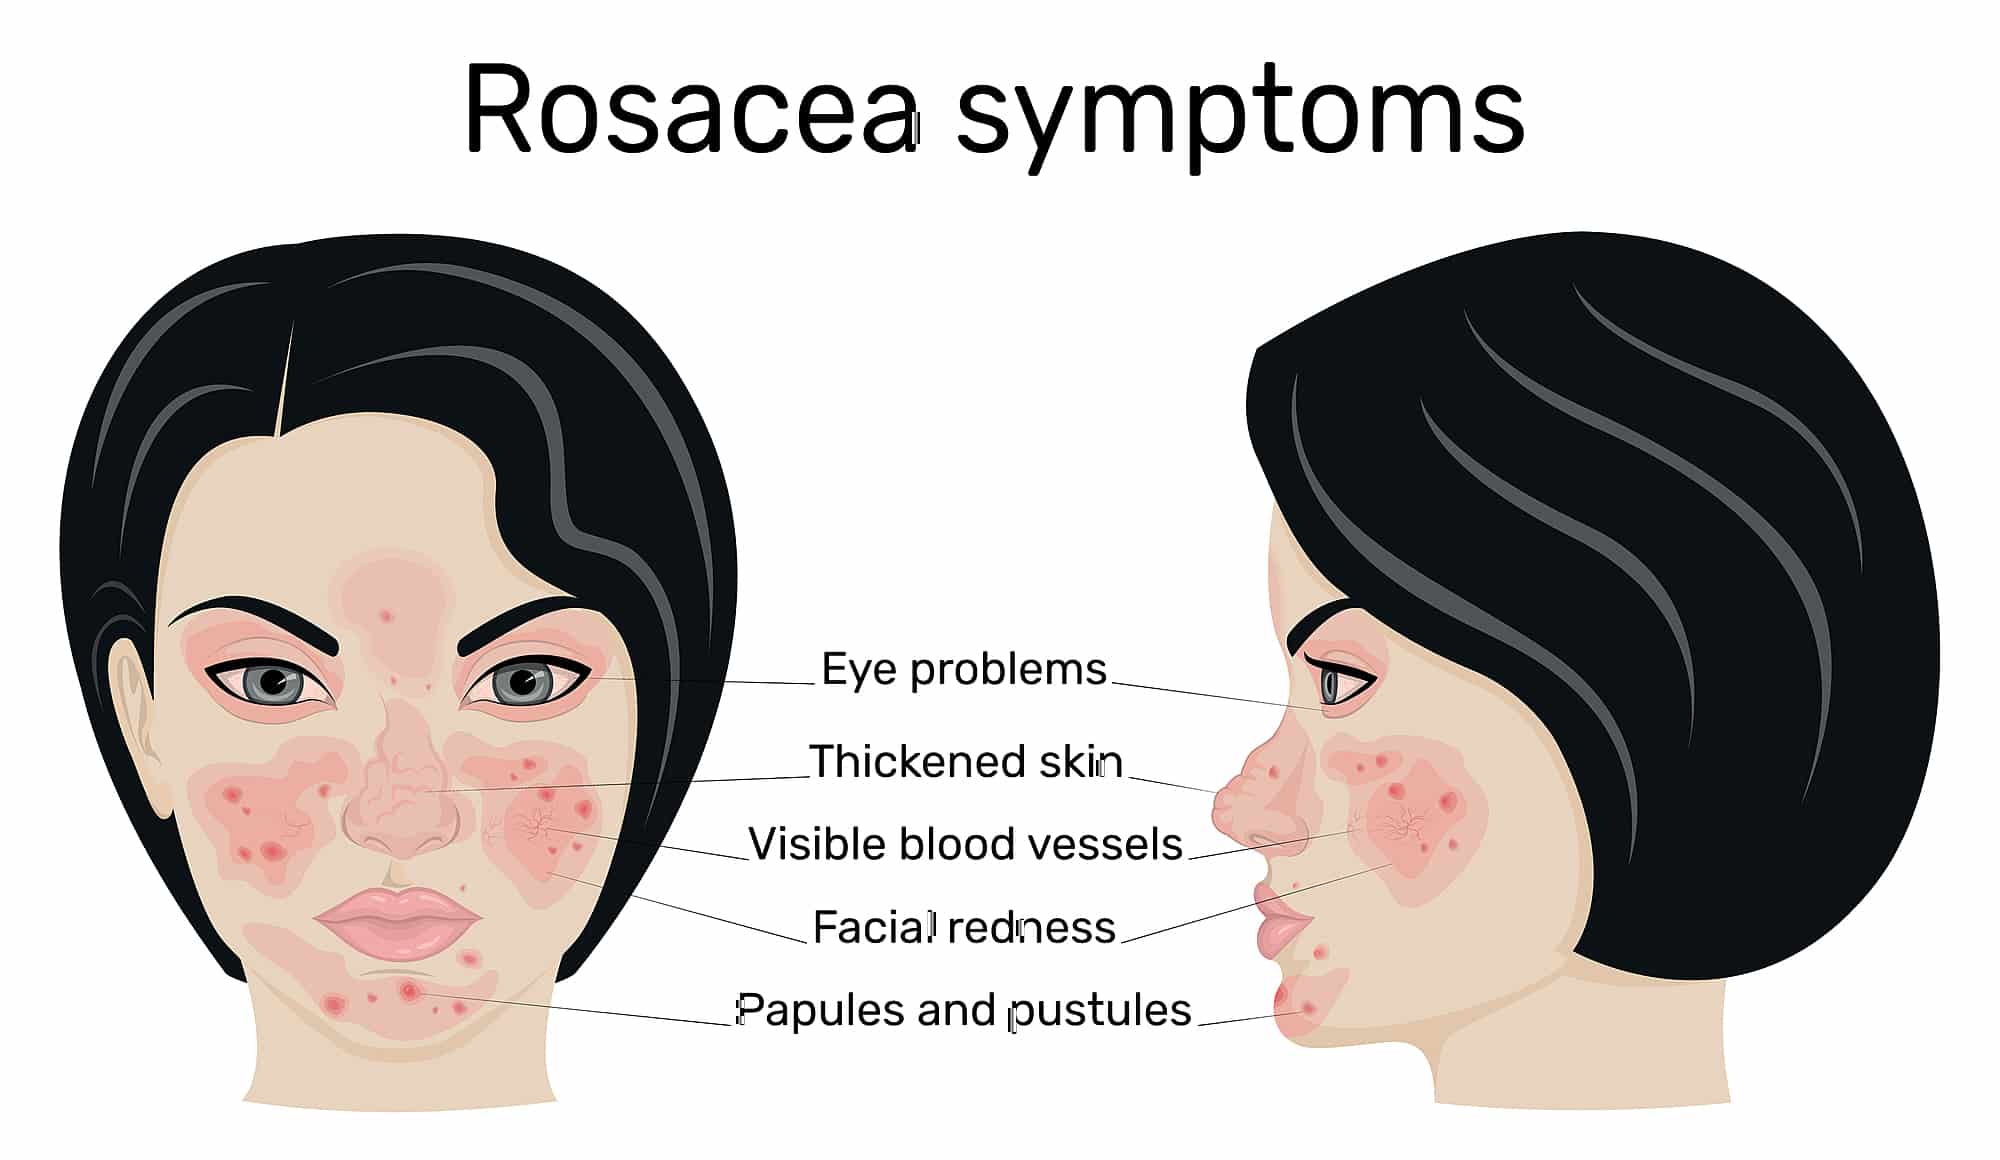 Some examples of rosacea symptoms to look out for